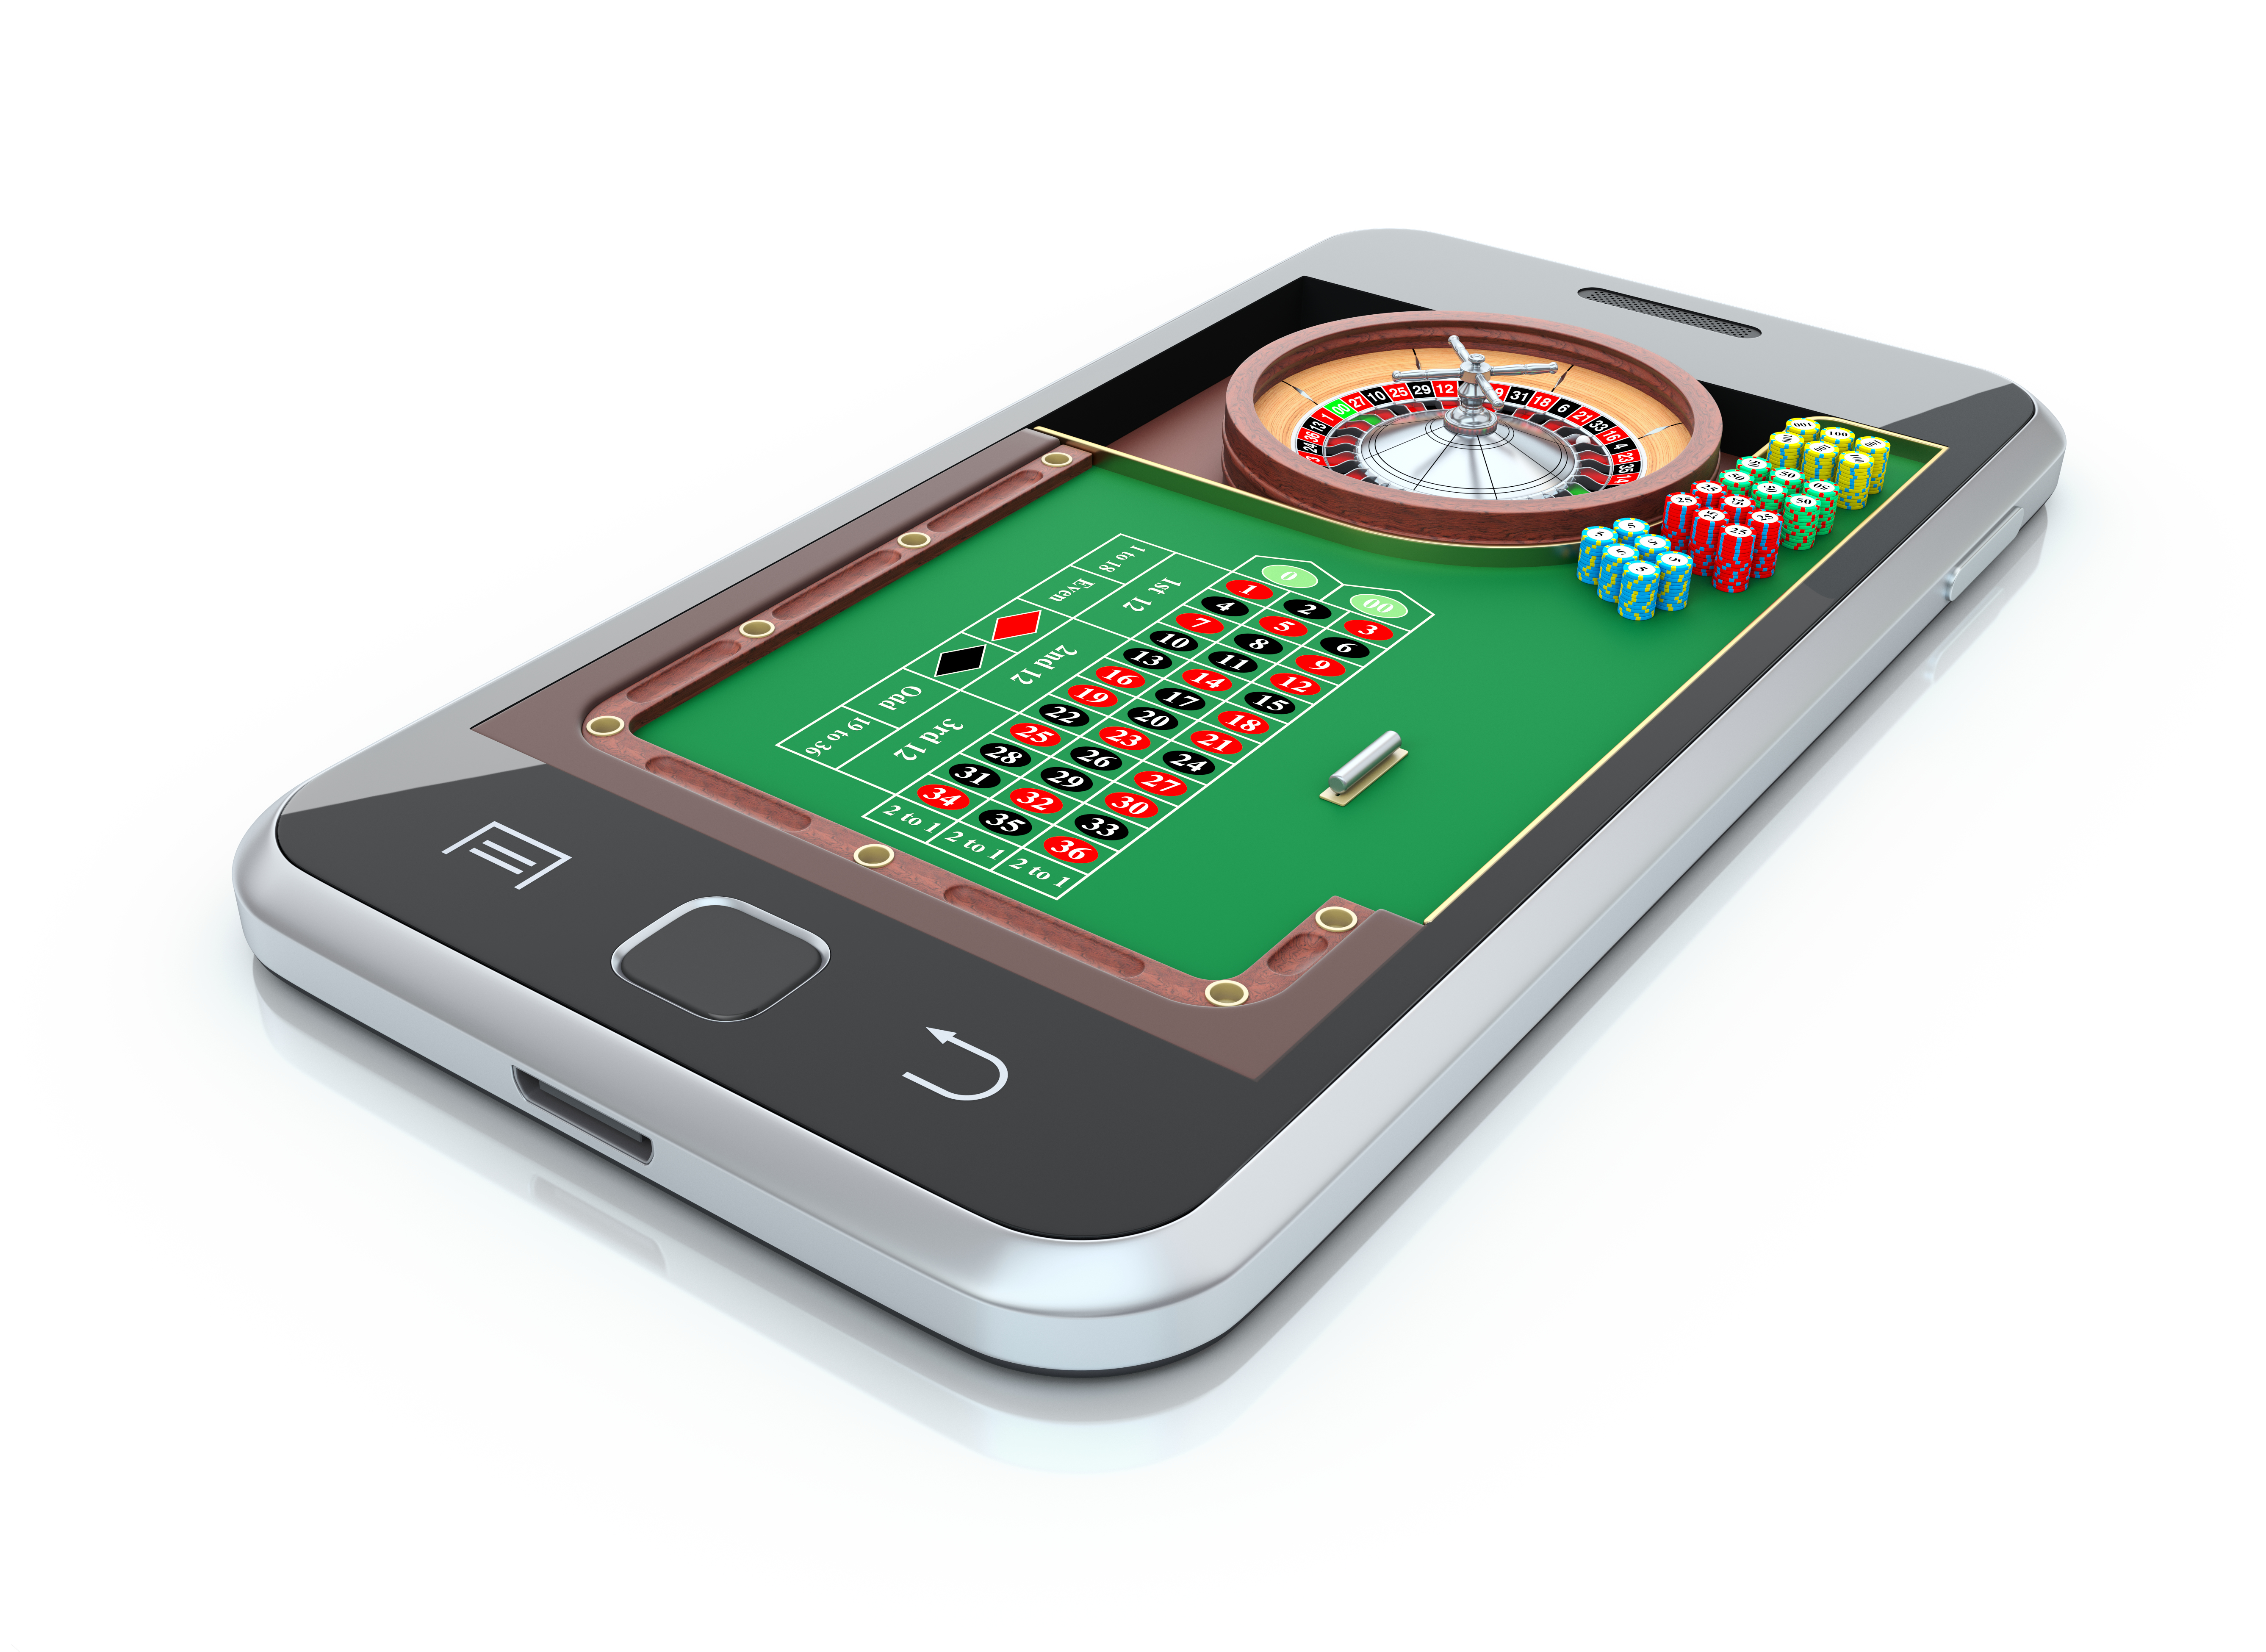 Roulette table in the mobile phone